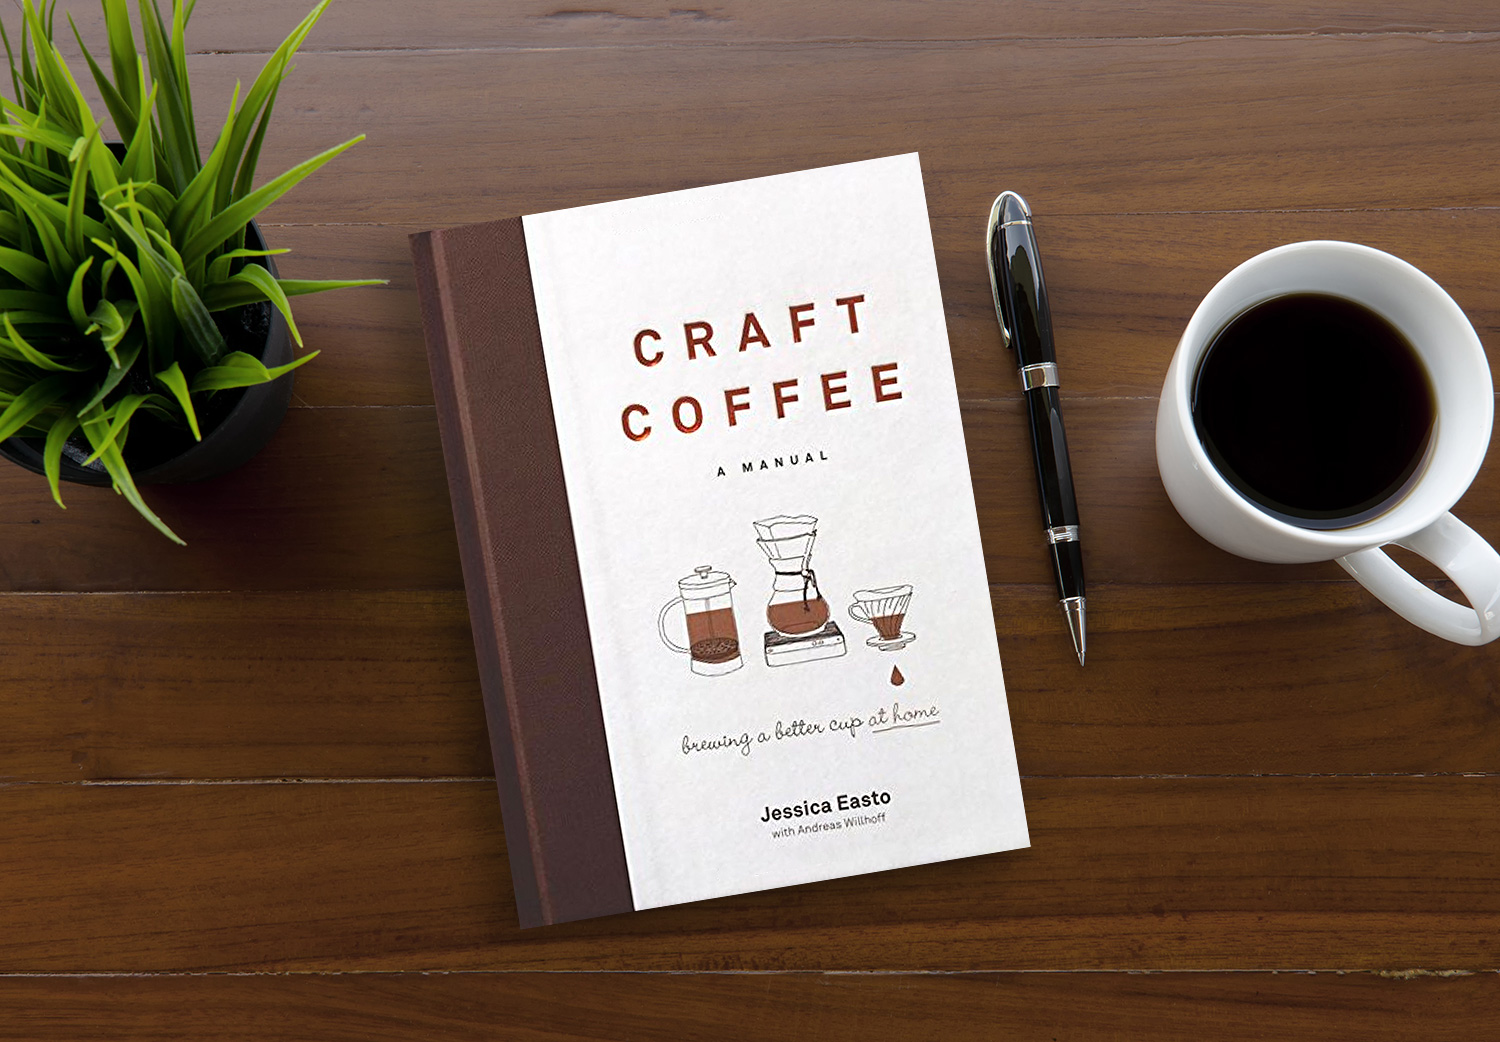 Craft Coffee: A Manual by Jessica Easto on a wooden table.